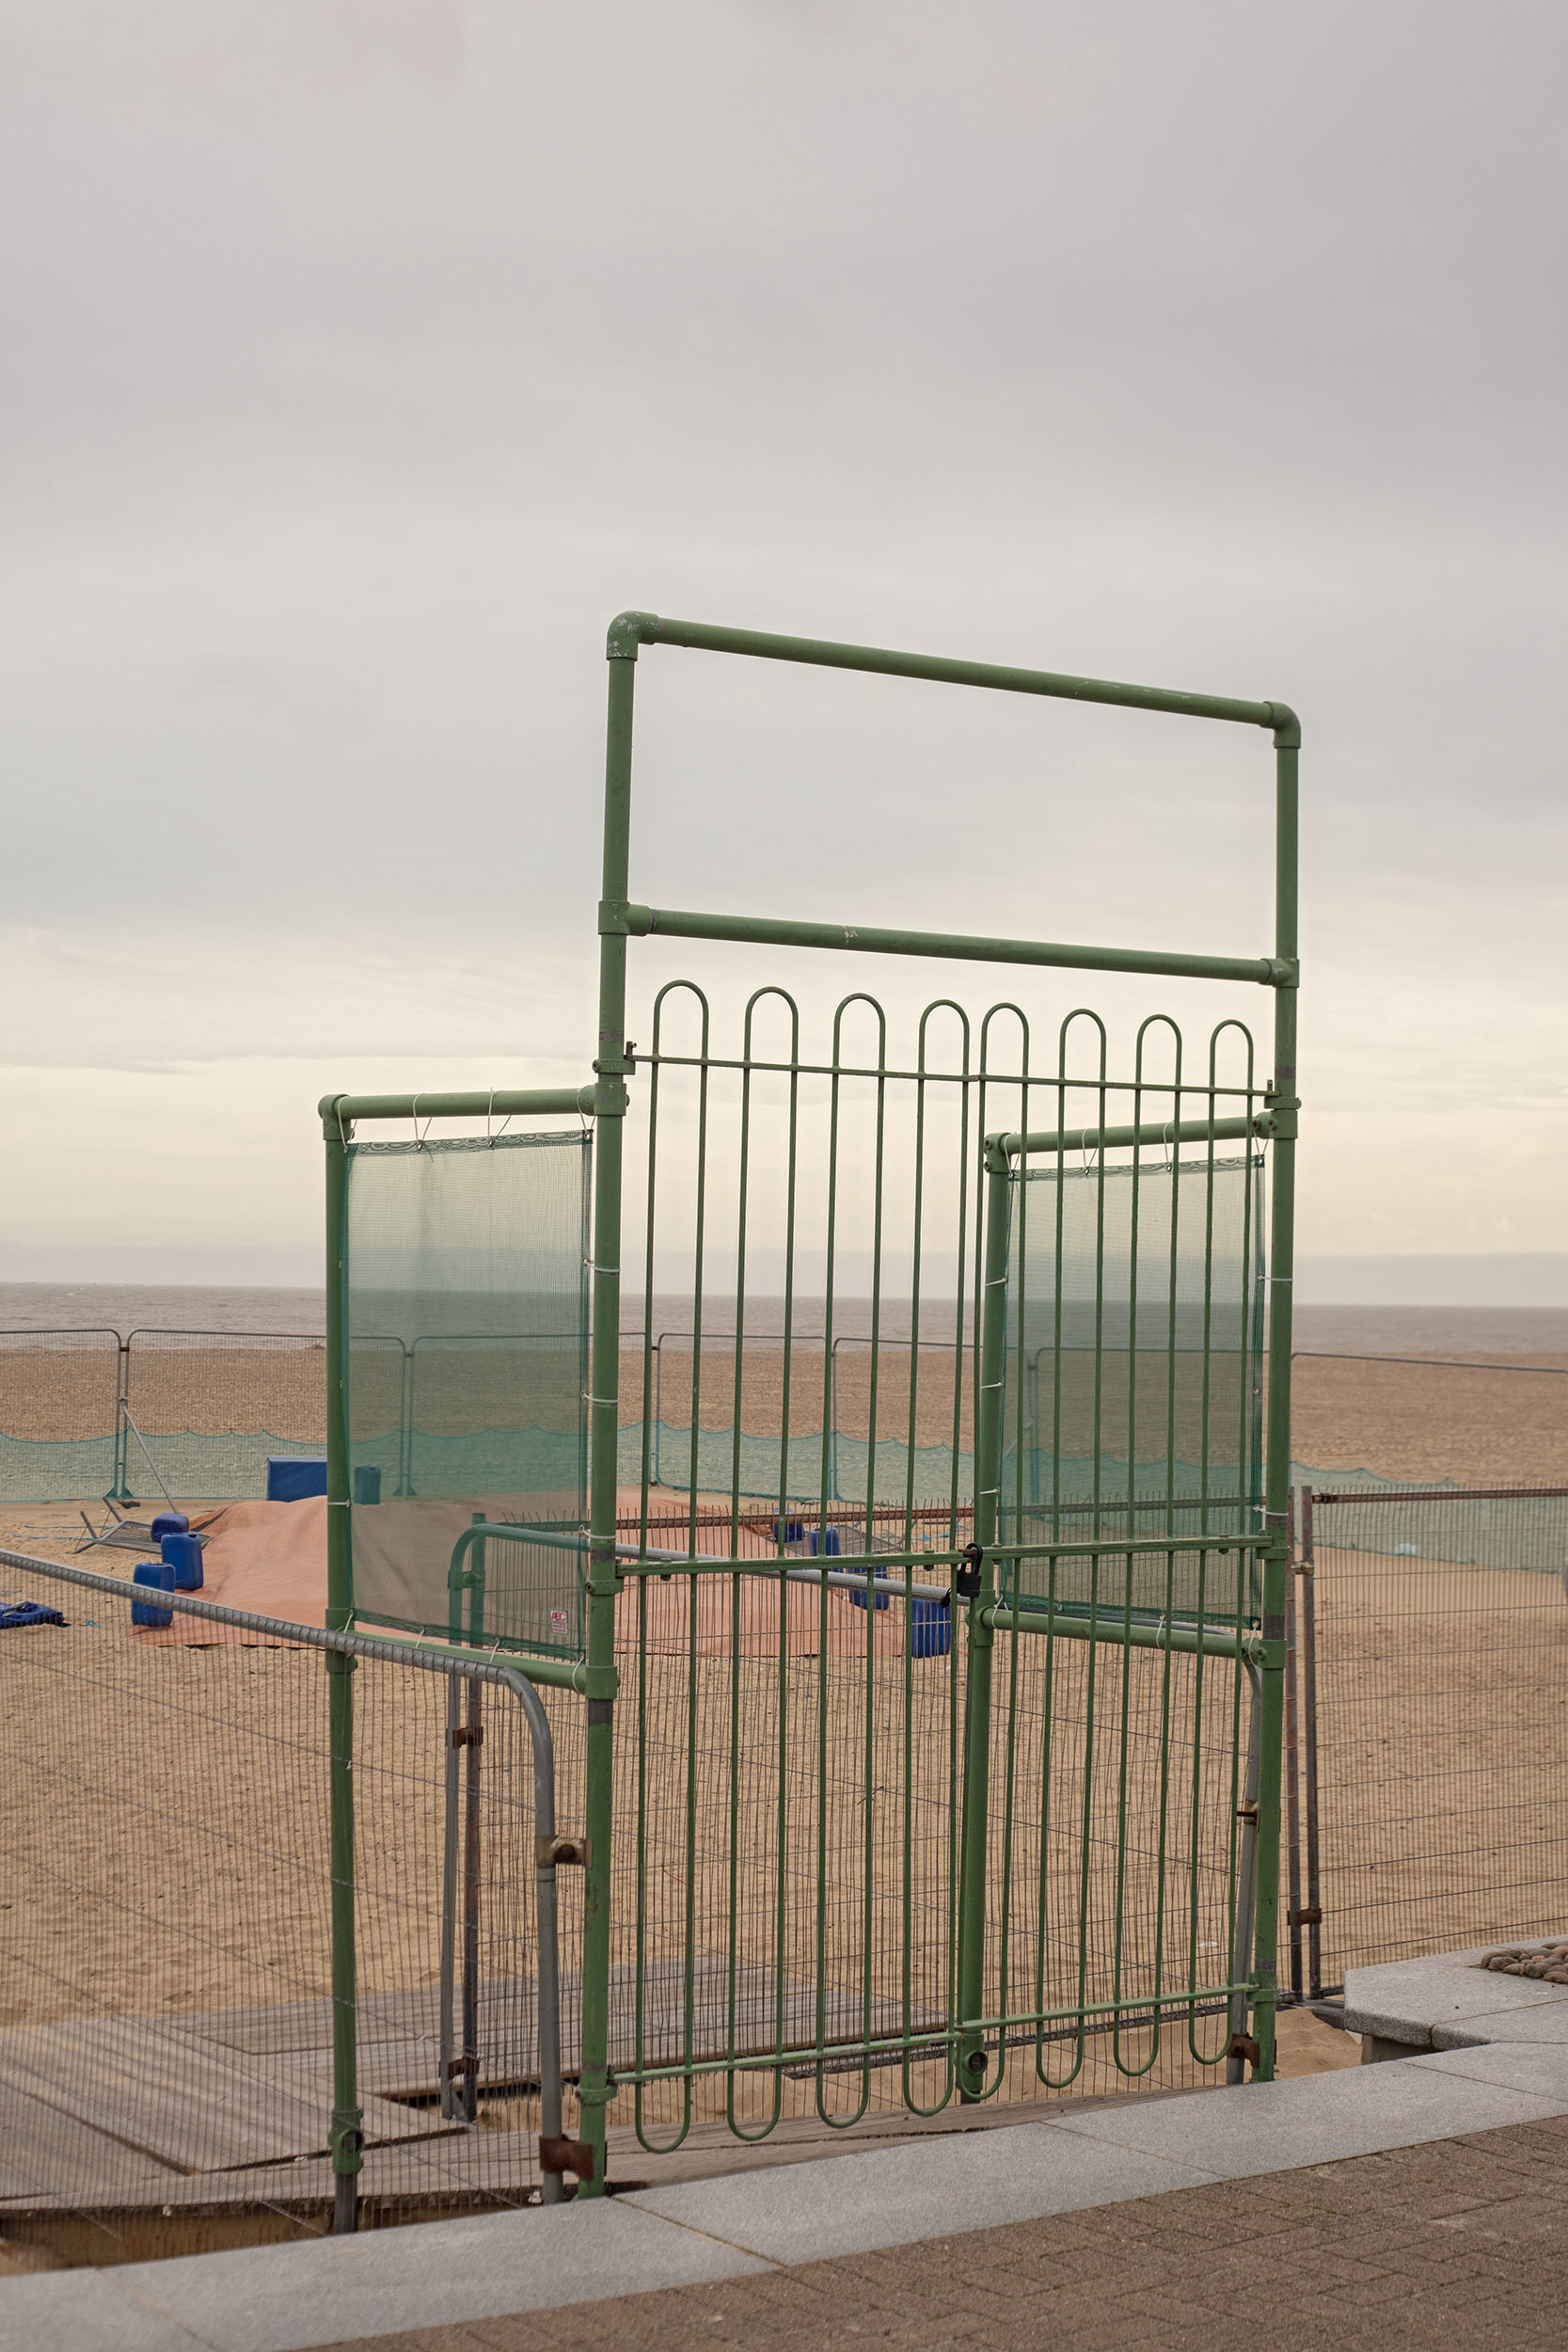 Photograph by Cerys Leahy depicting a gate to an out of use beach play area.